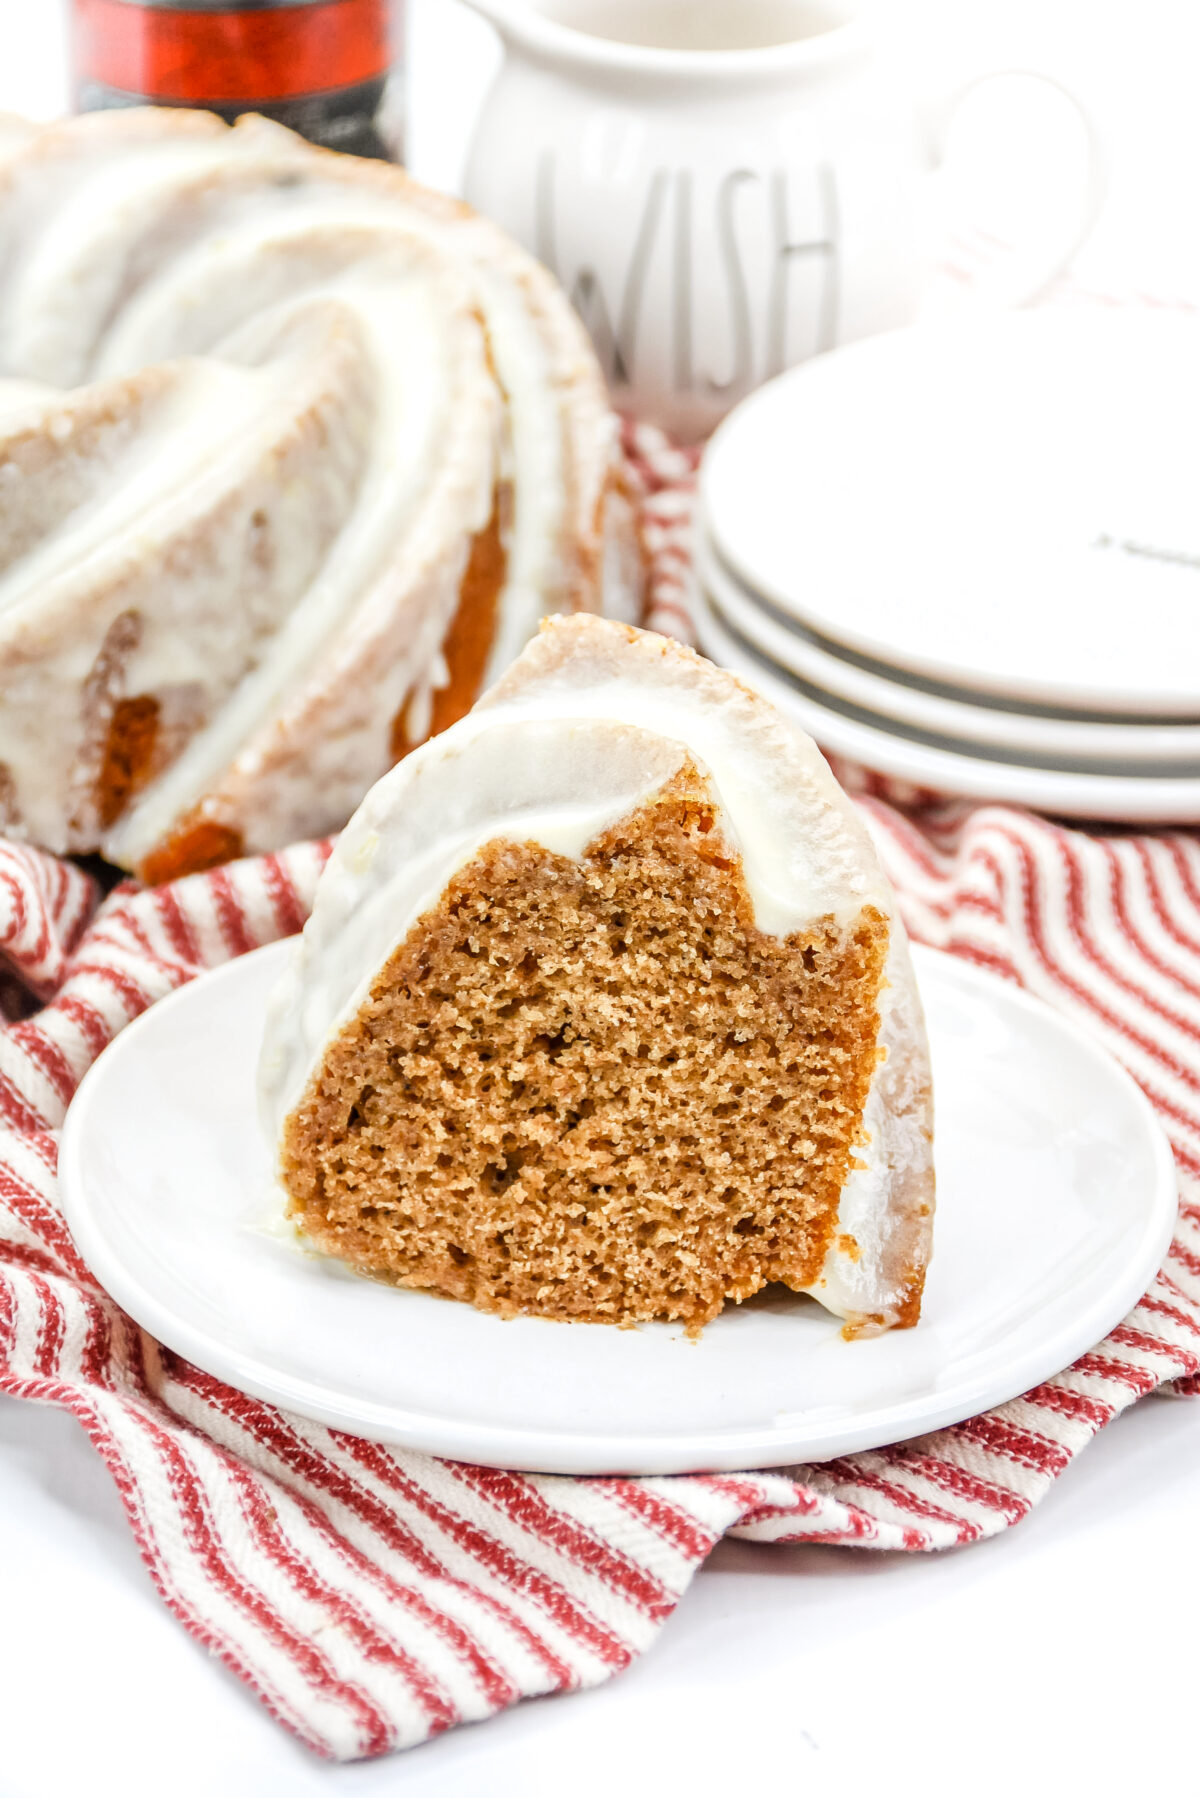 Indulge in a delicious spiced rum bundt cake with rum glaze this holiday season! This easy cake recipe is perfect for any occasion.